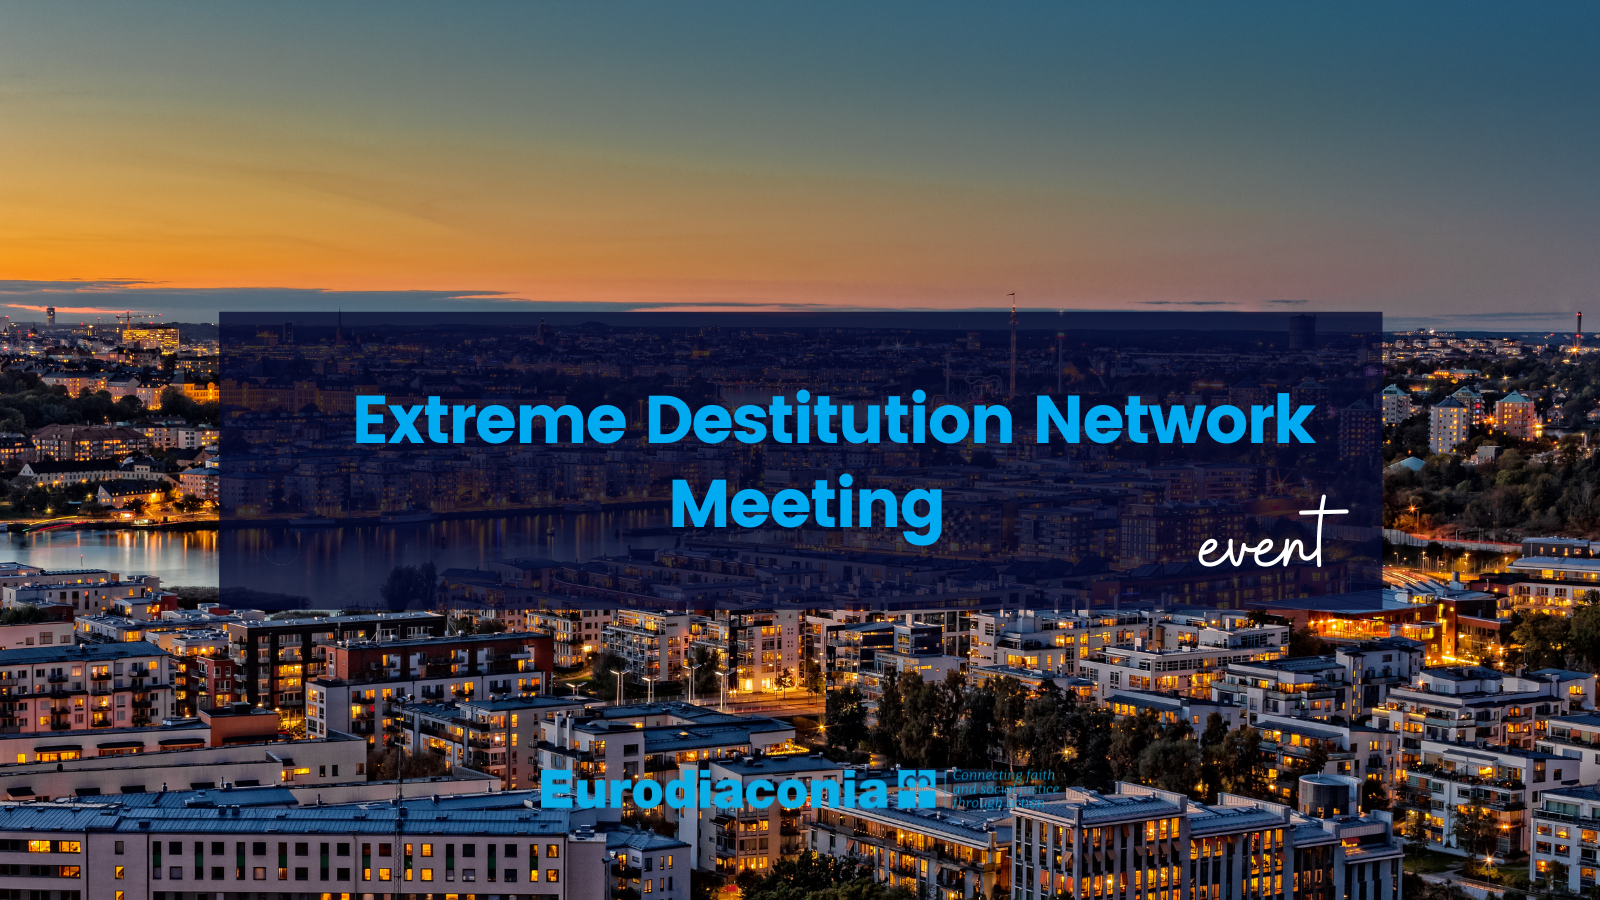 Extreme Destitution Network Meeting - Homelessness: Prevention, integrated services, and Housing-led solutions | 16-17 June 2022